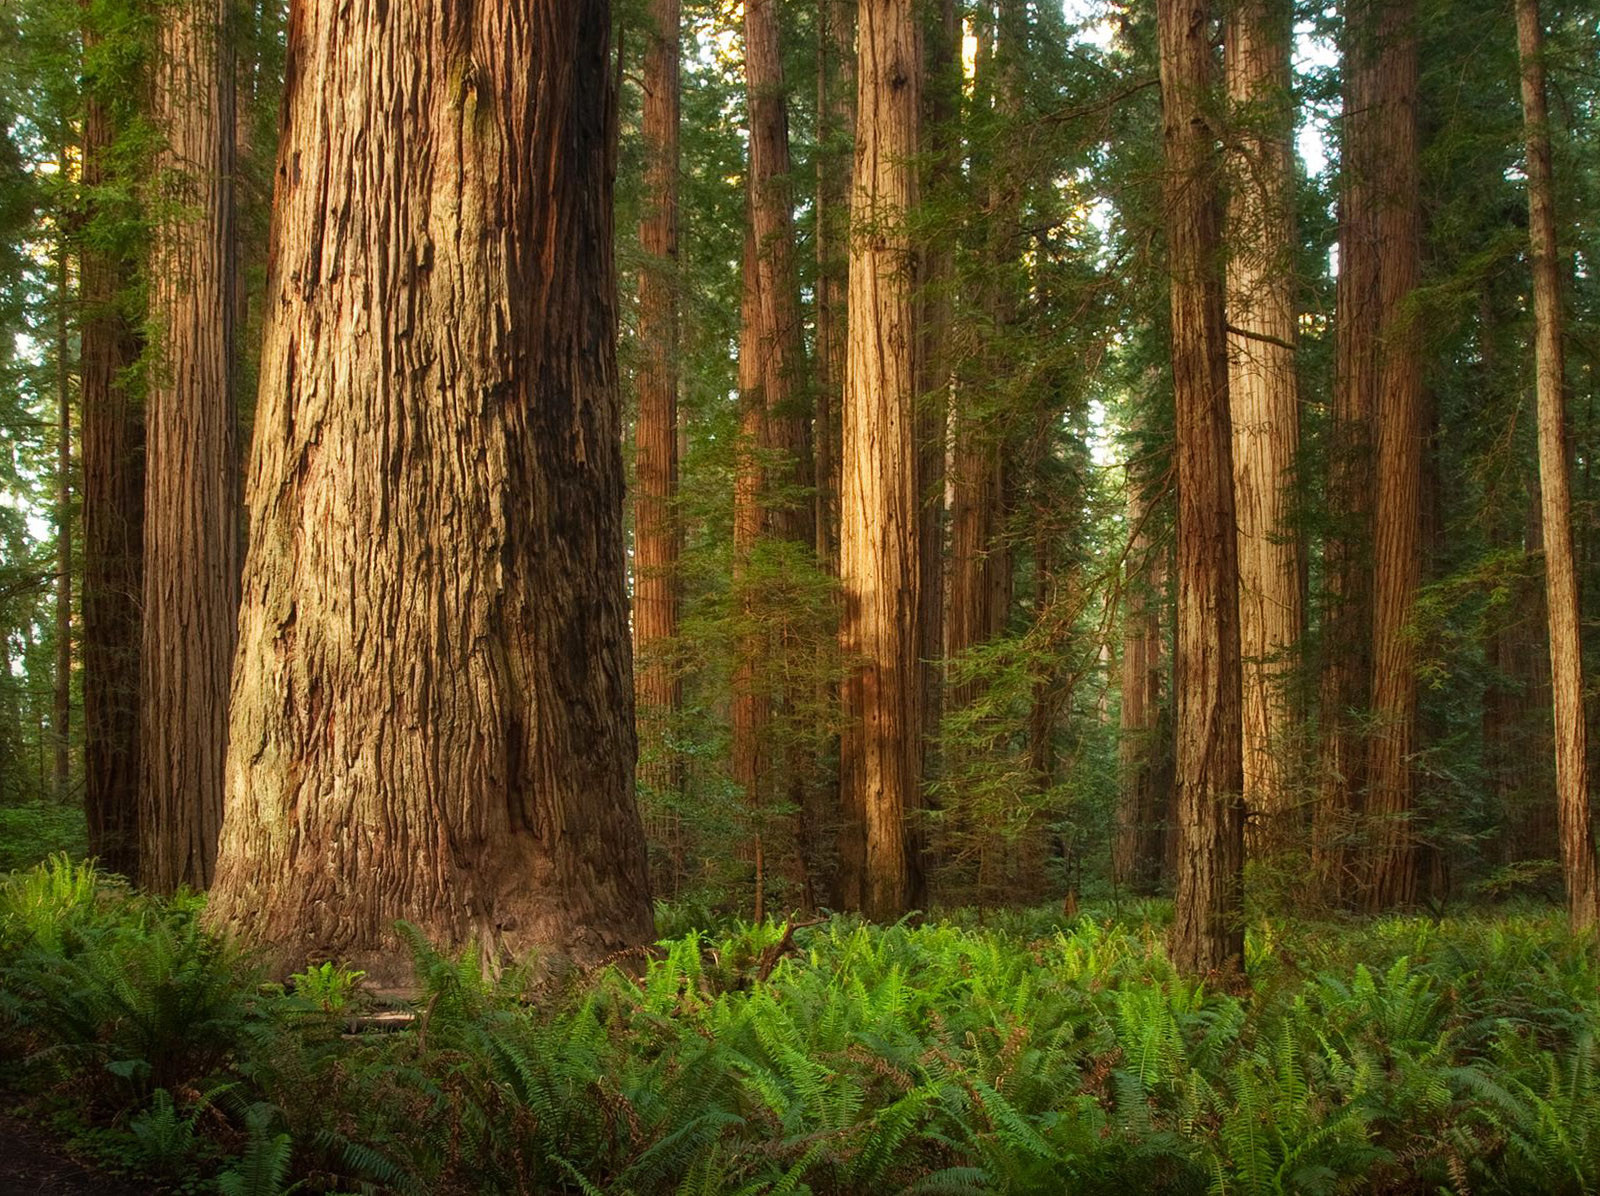 Amazing HD Wallpaper Of Redwood Forests To Calm Your